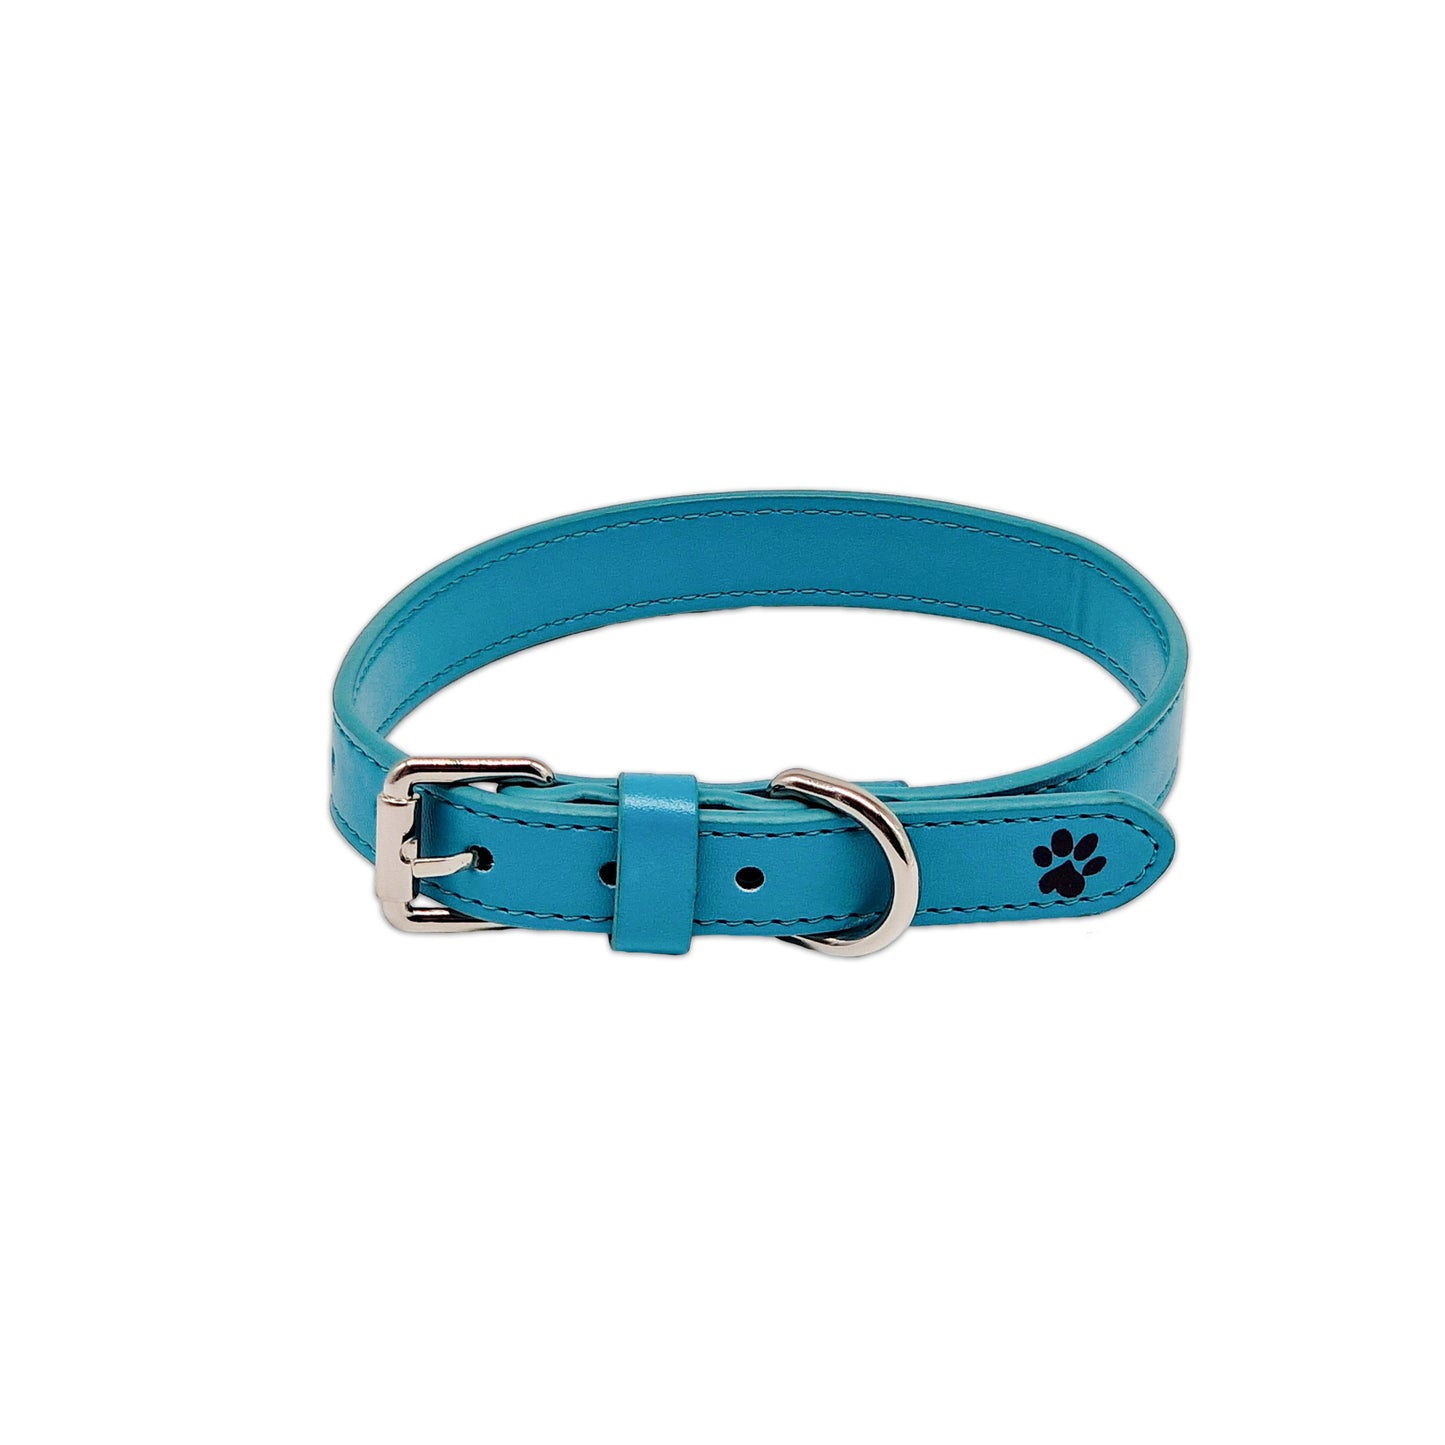 Twinkly Turquoise Collar primary white